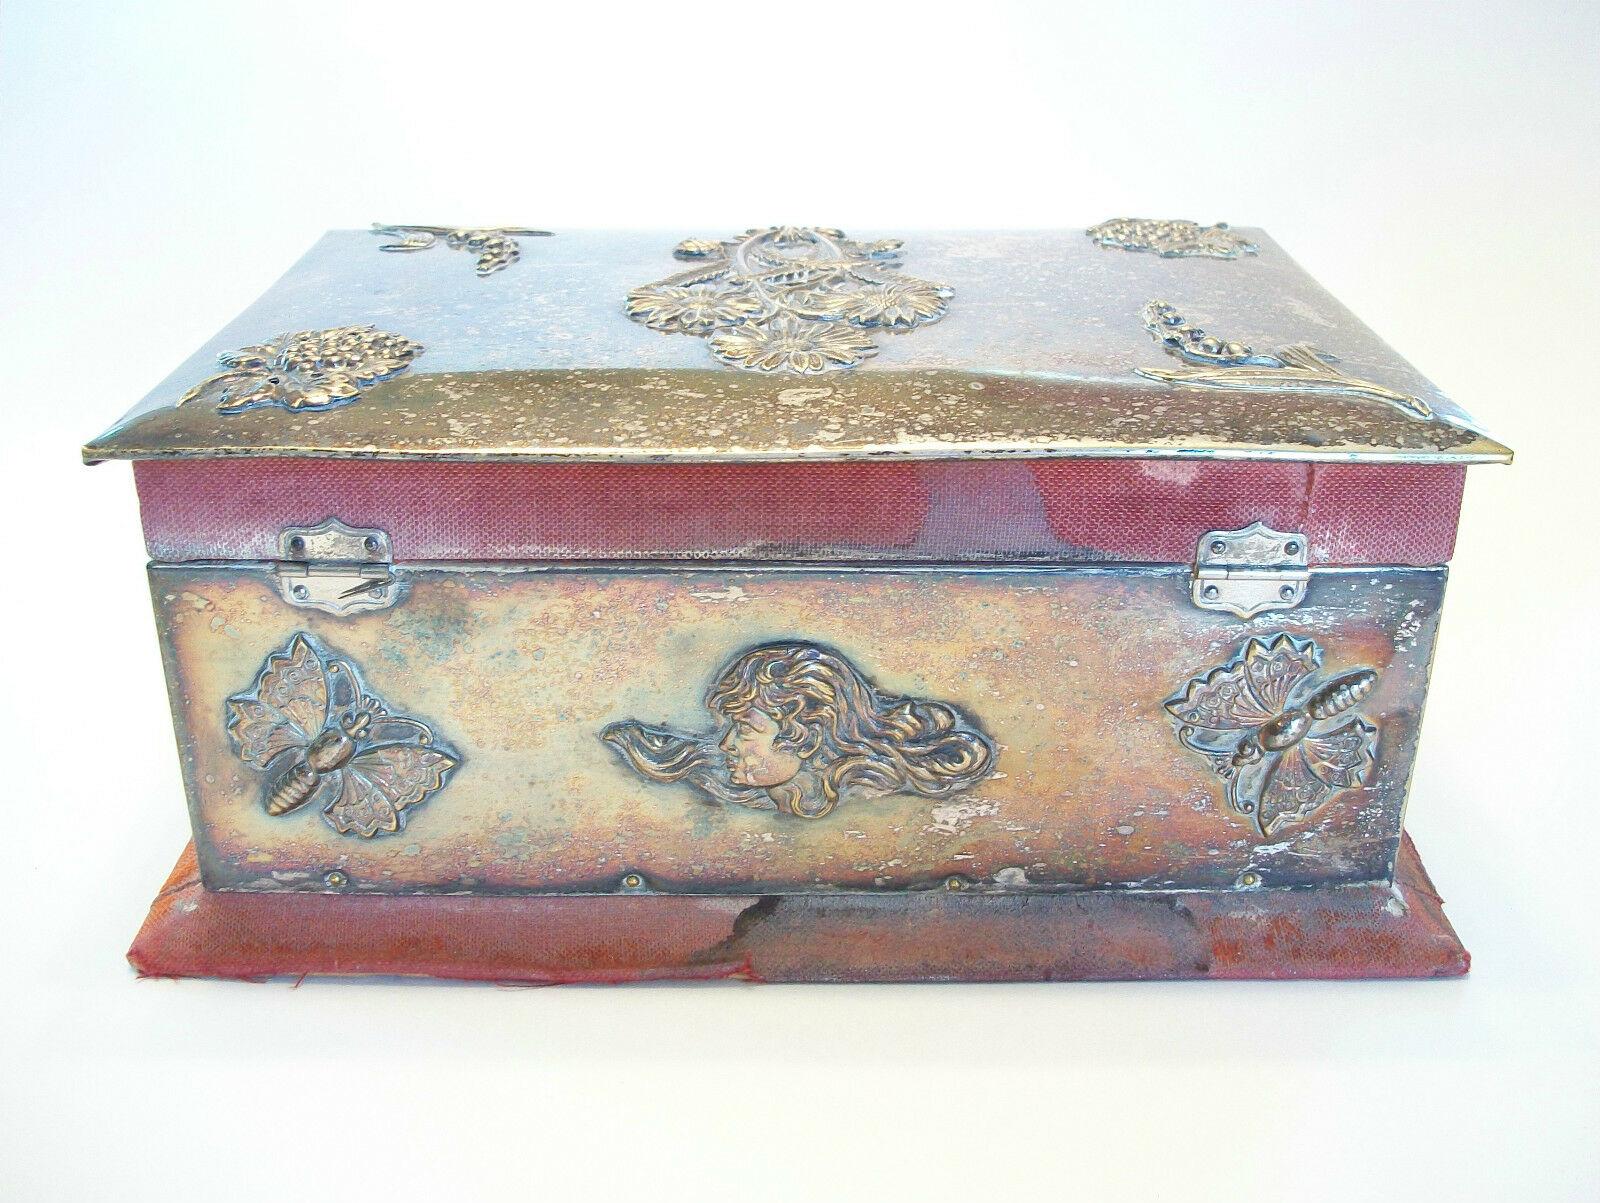 19th Century Arts & Crafts Jewelry Box with Applied Decoration - Unsigned - U K - Circa 1880 For Sale